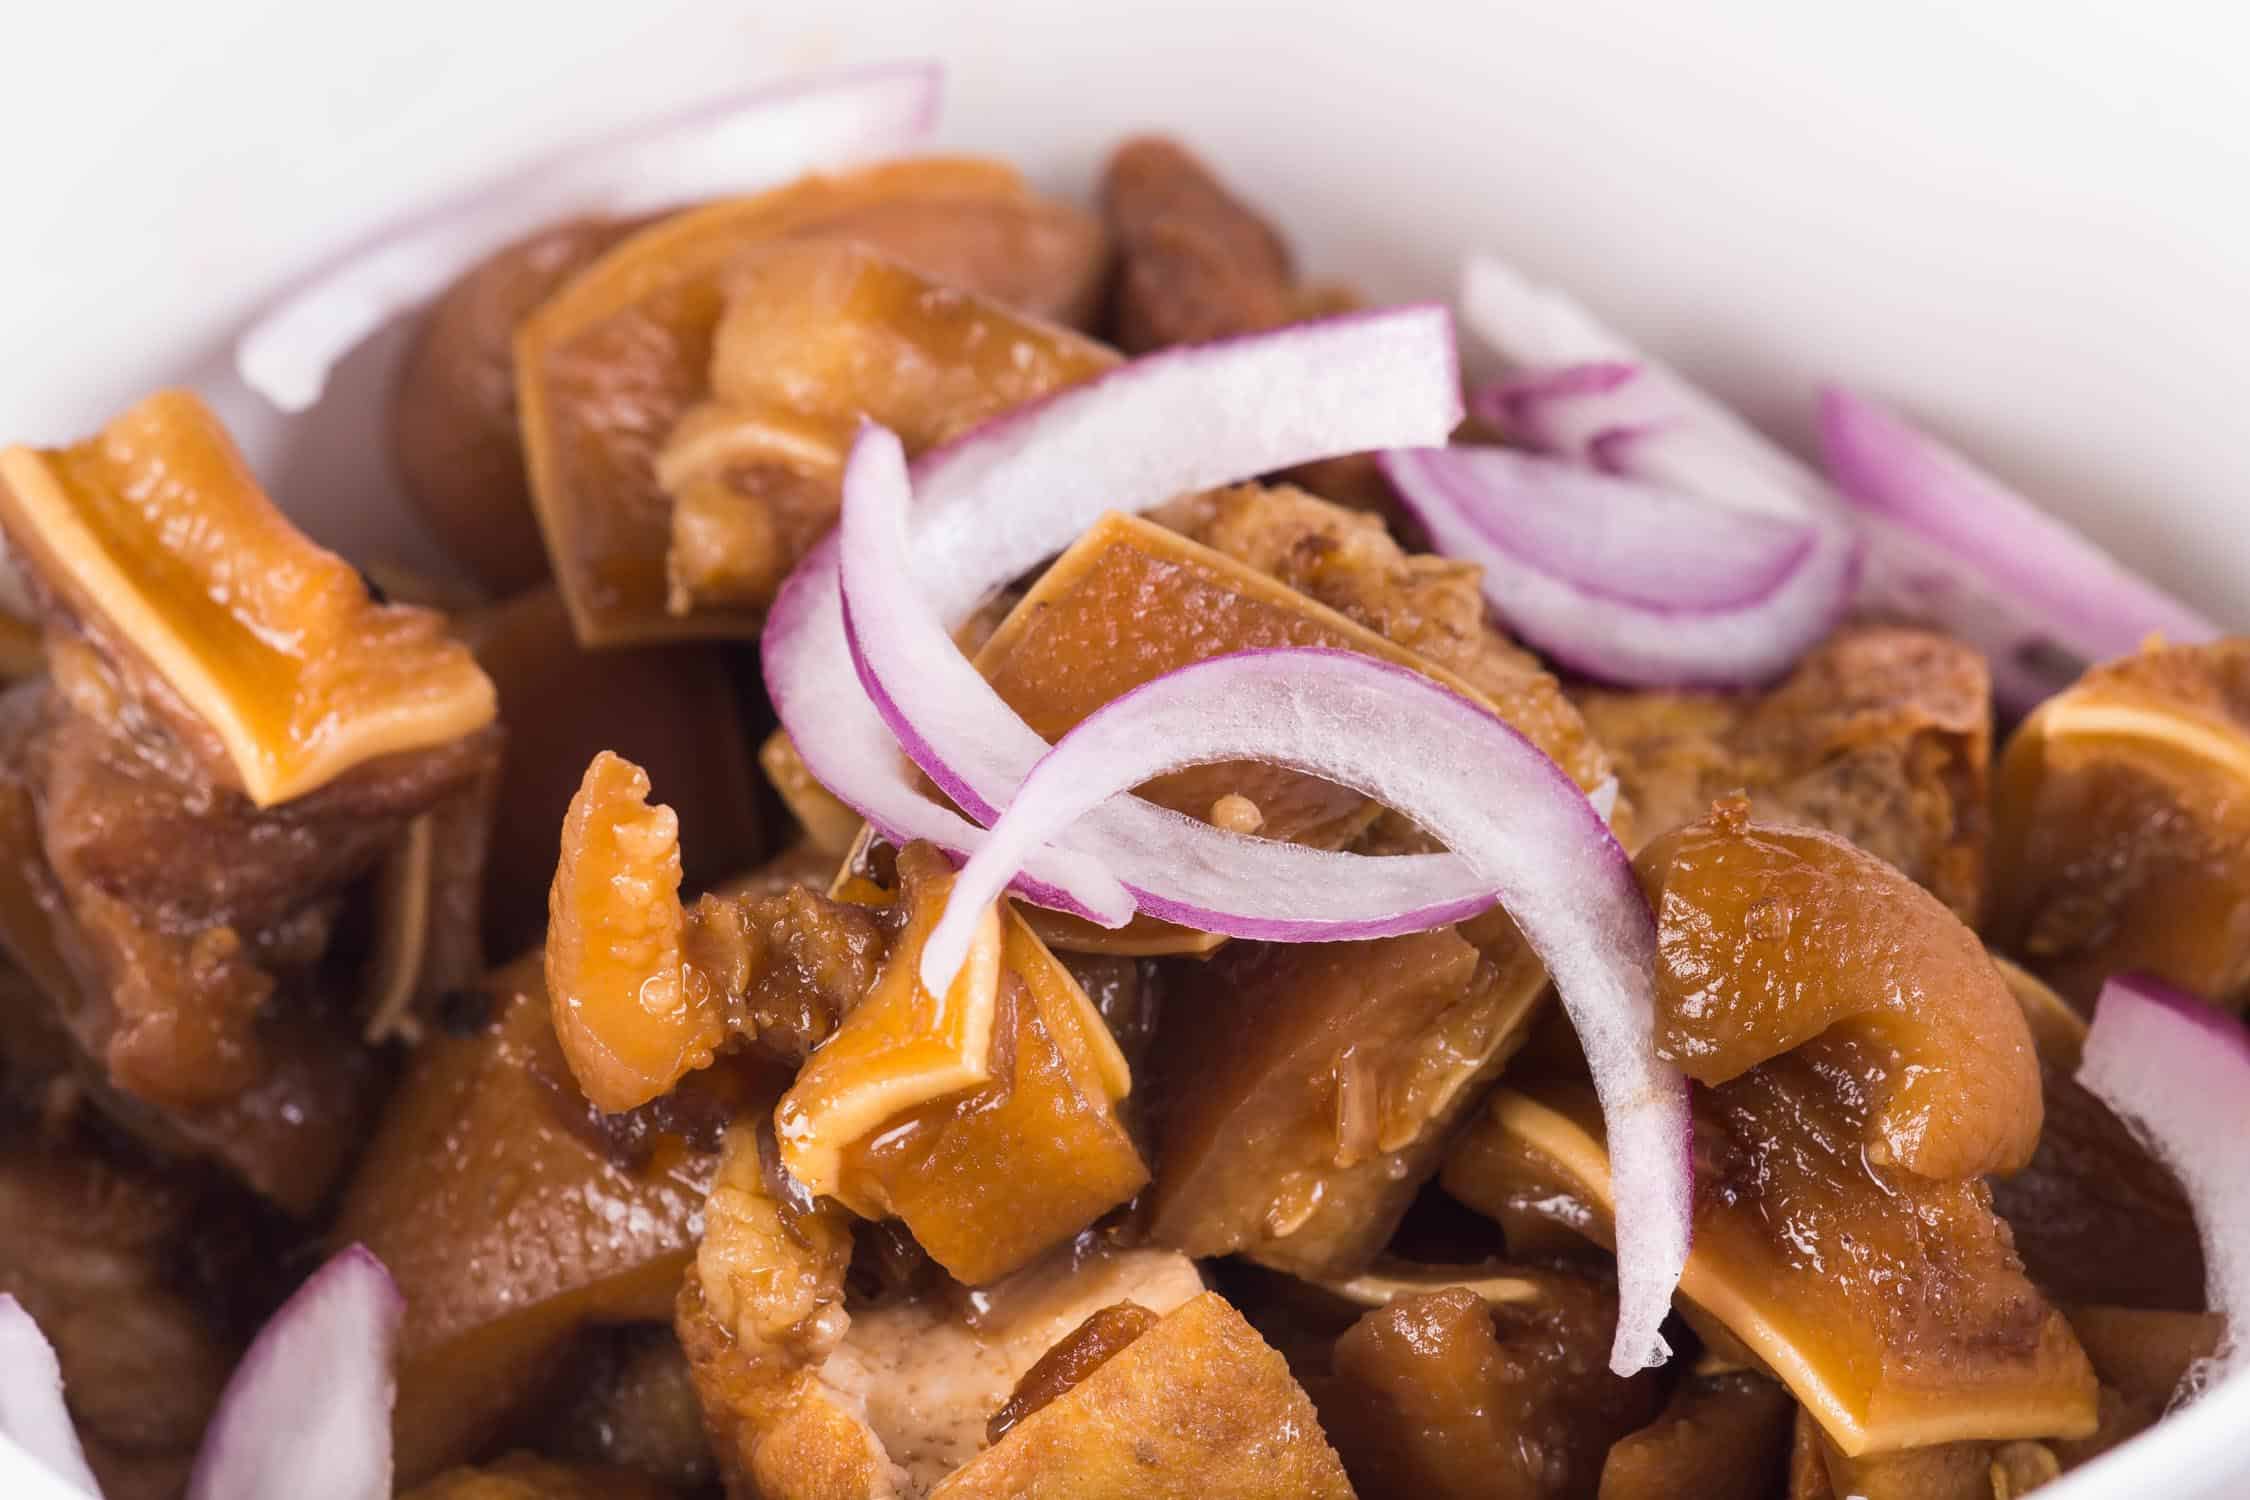 tokwa't baboy (famous delicacy in the Philippines) or pig ears and tofu in sweet soy sauce and vinegar sauce